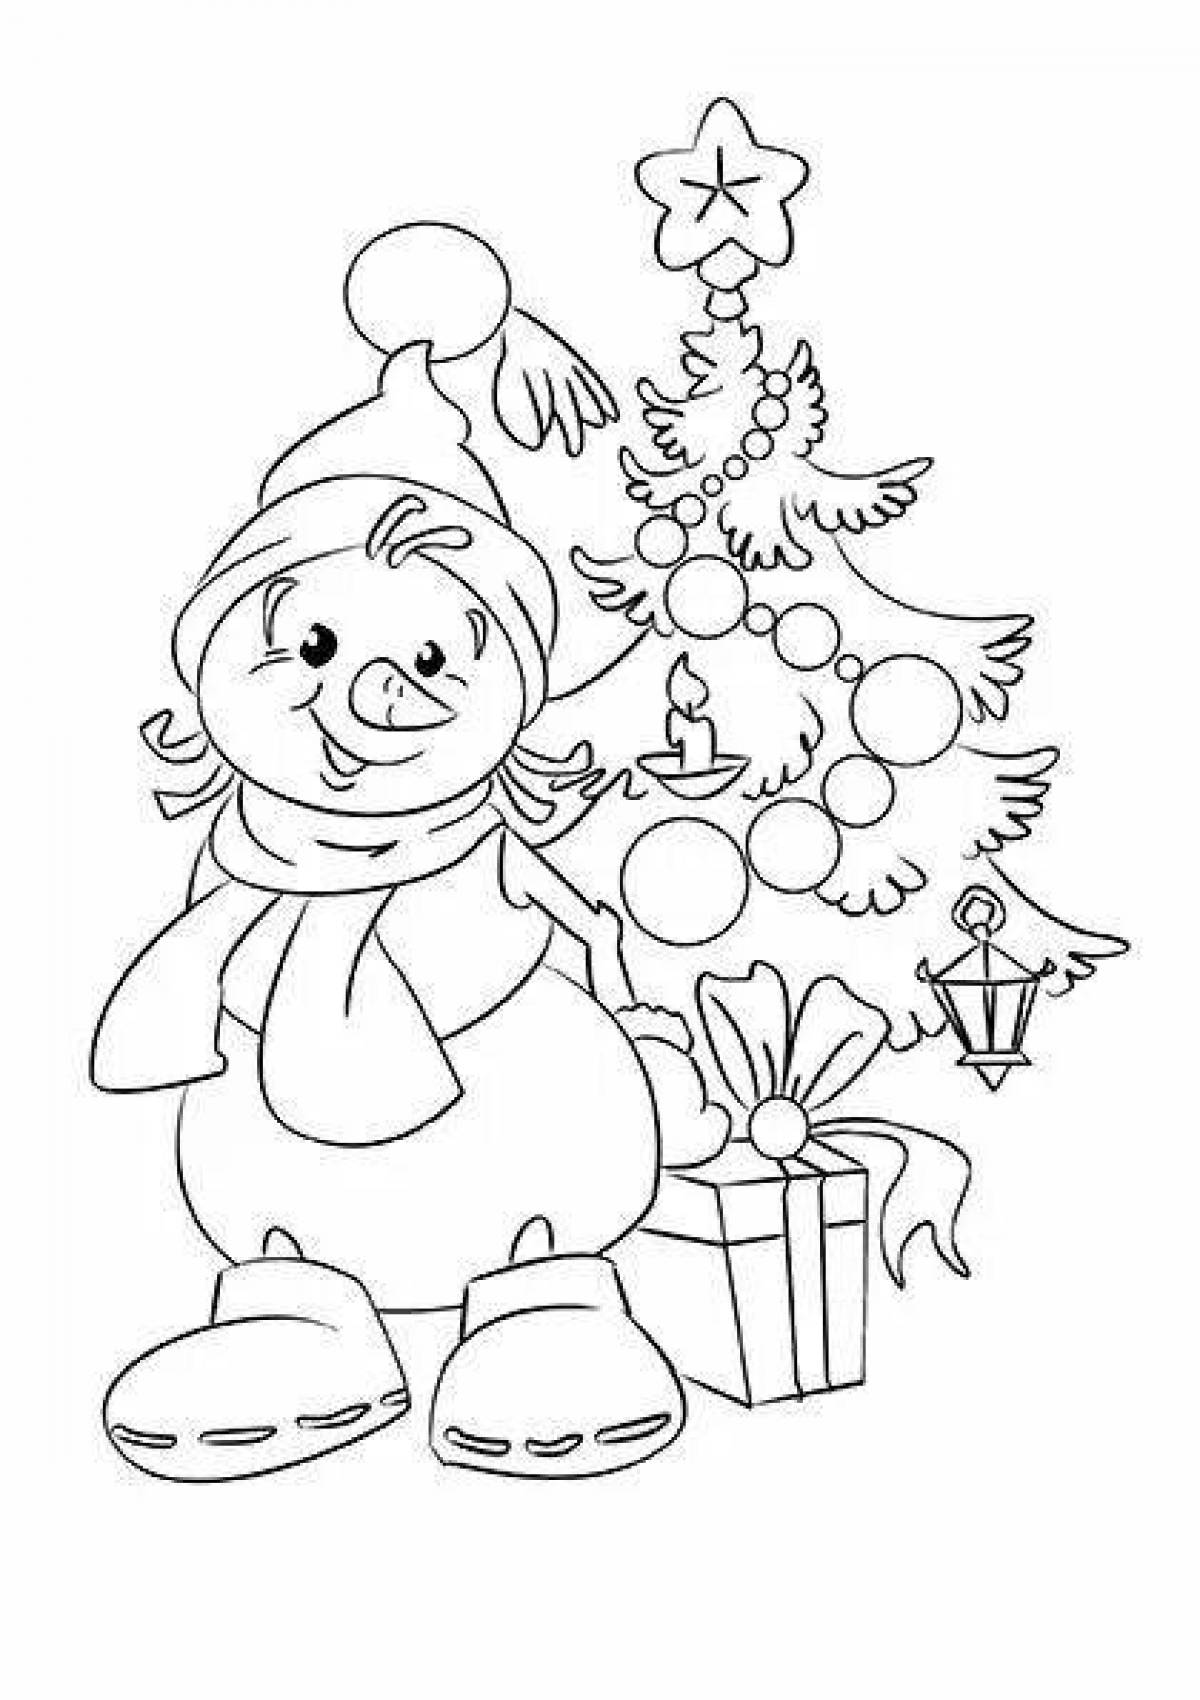 Adorable tree and snowman coloring page